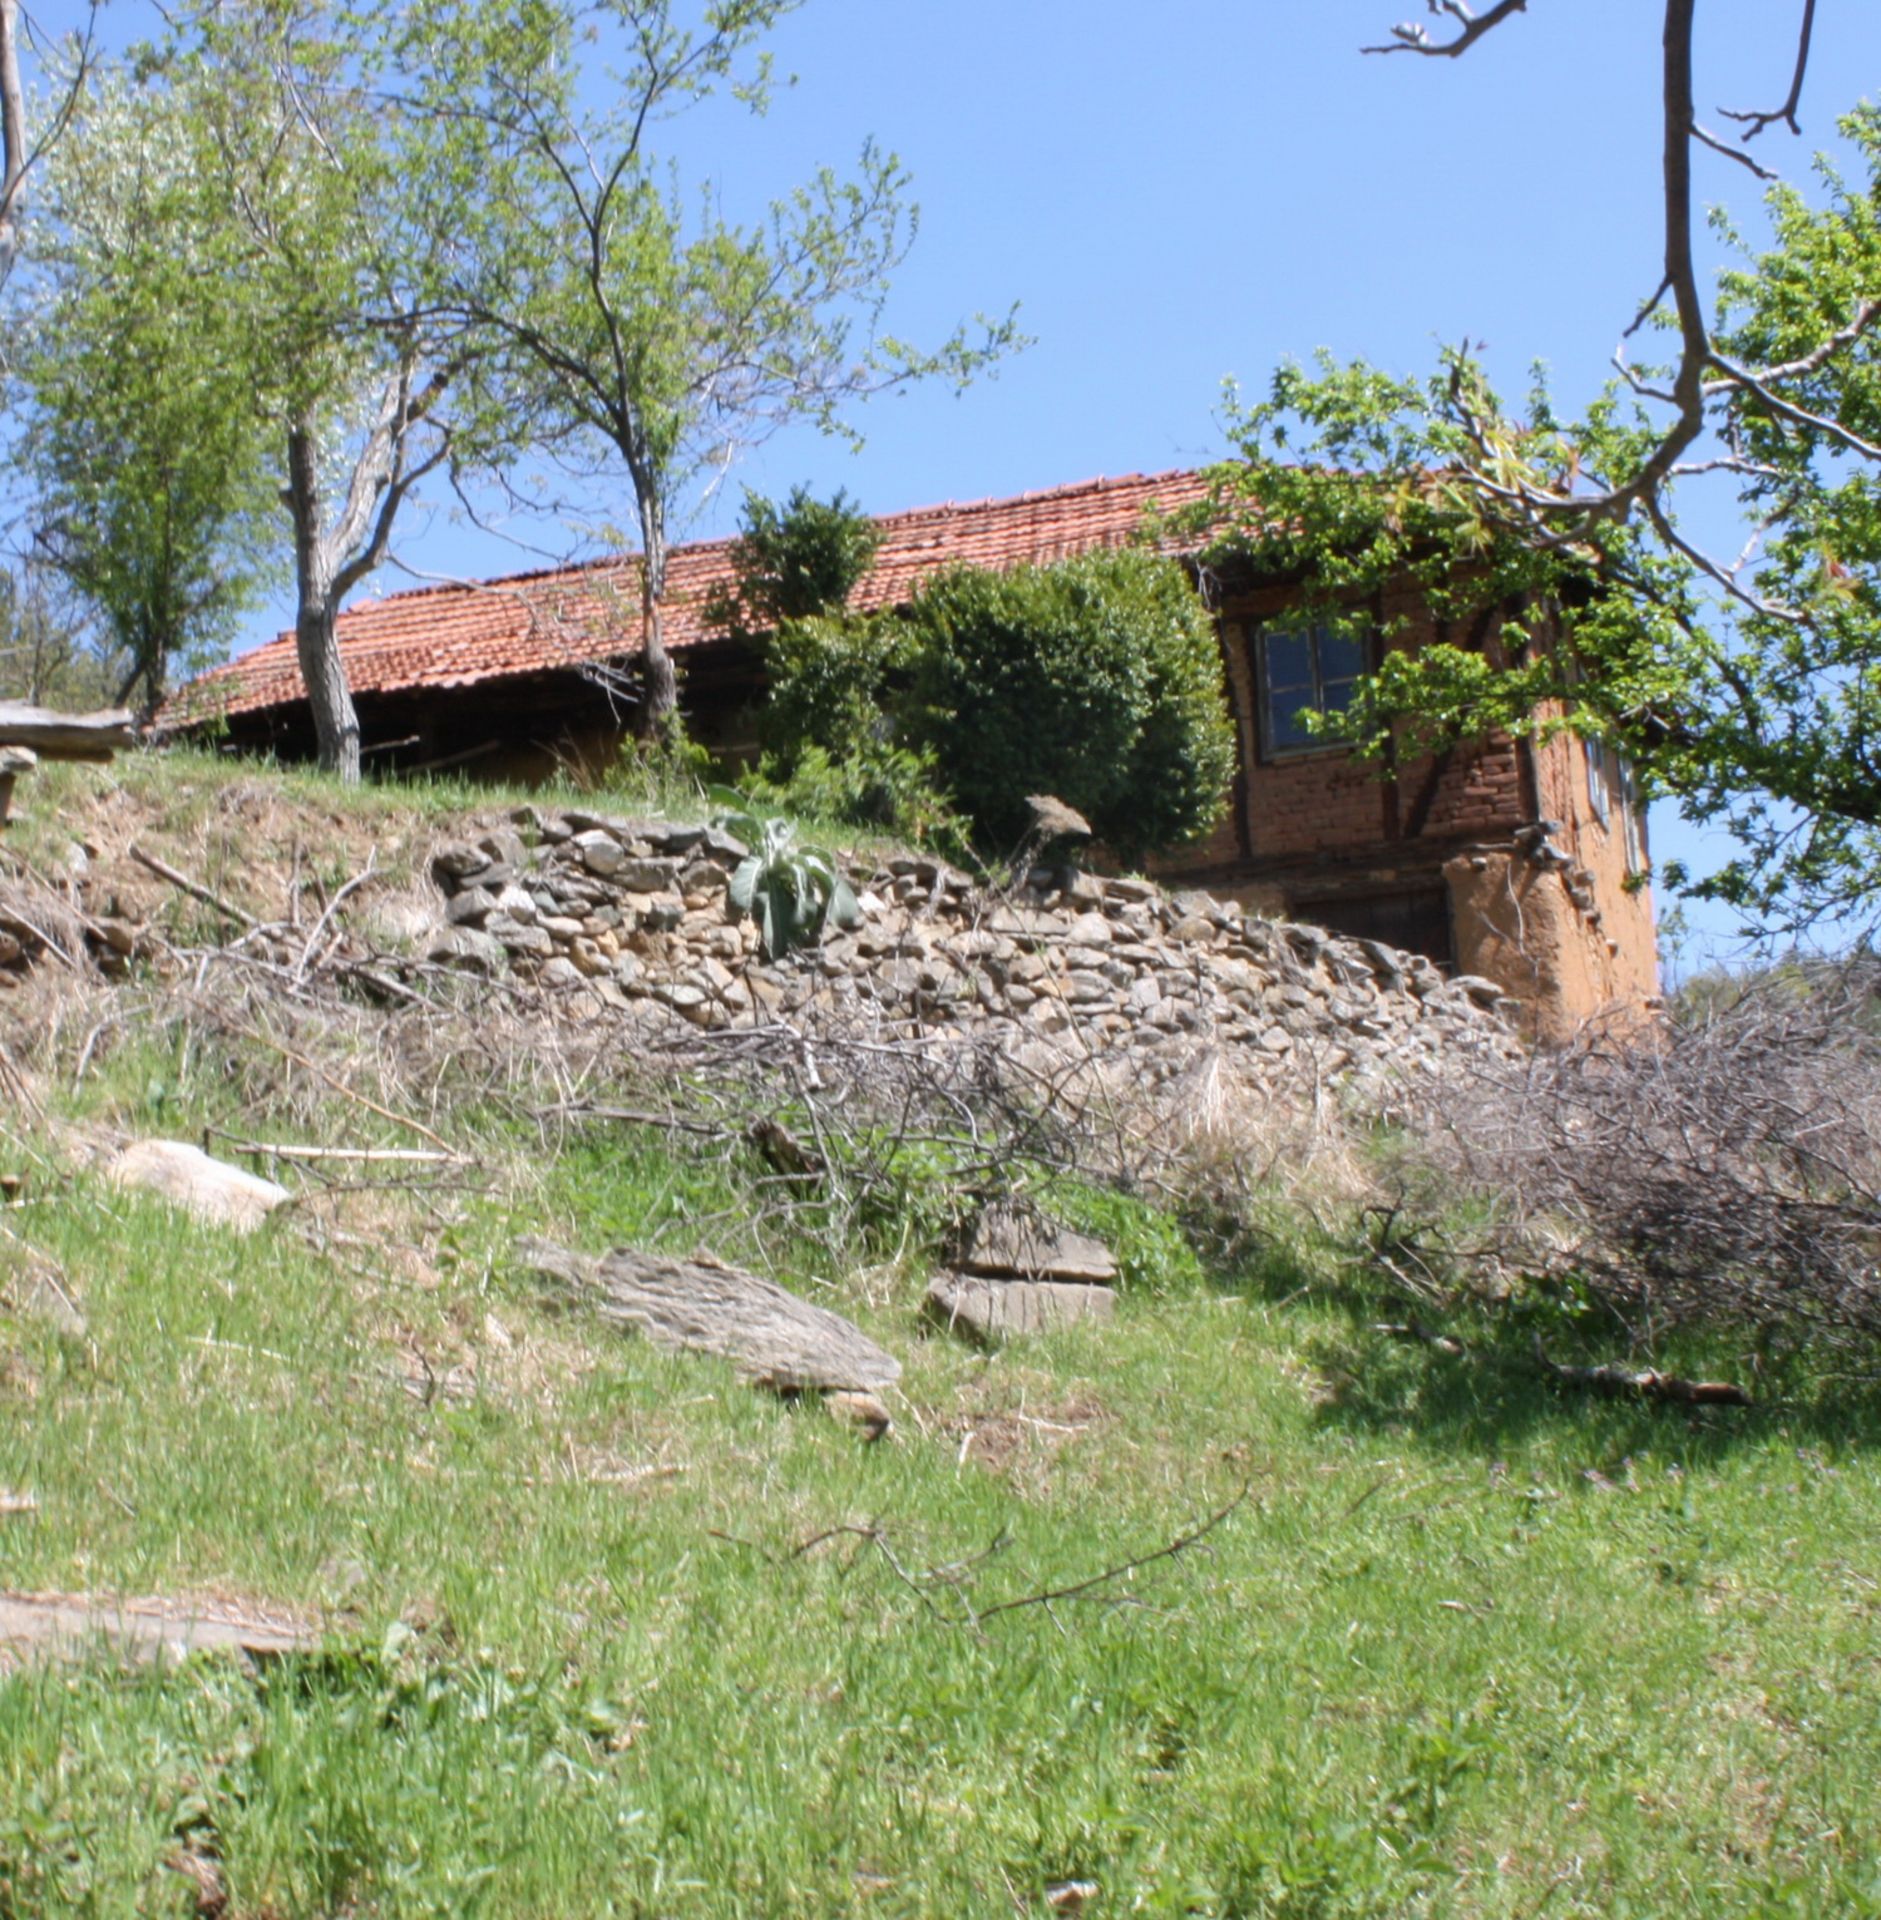 7.5 Acre Ranch in Bulgaria 1h from Sofia - Image 17 of 32